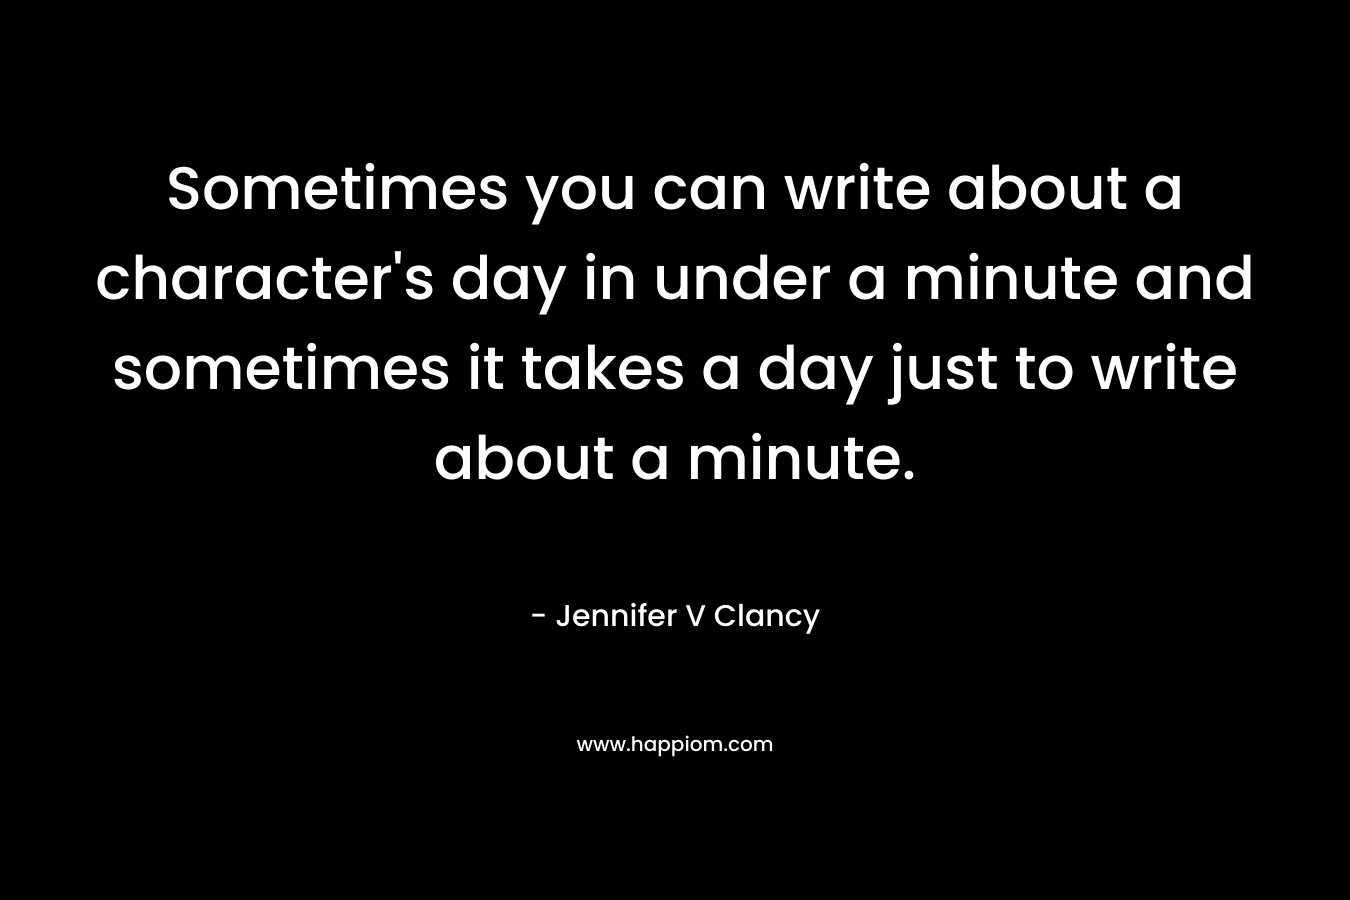 Sometimes you can write about a character's day in under a minute and sometimes it takes a day just to write about a minute.